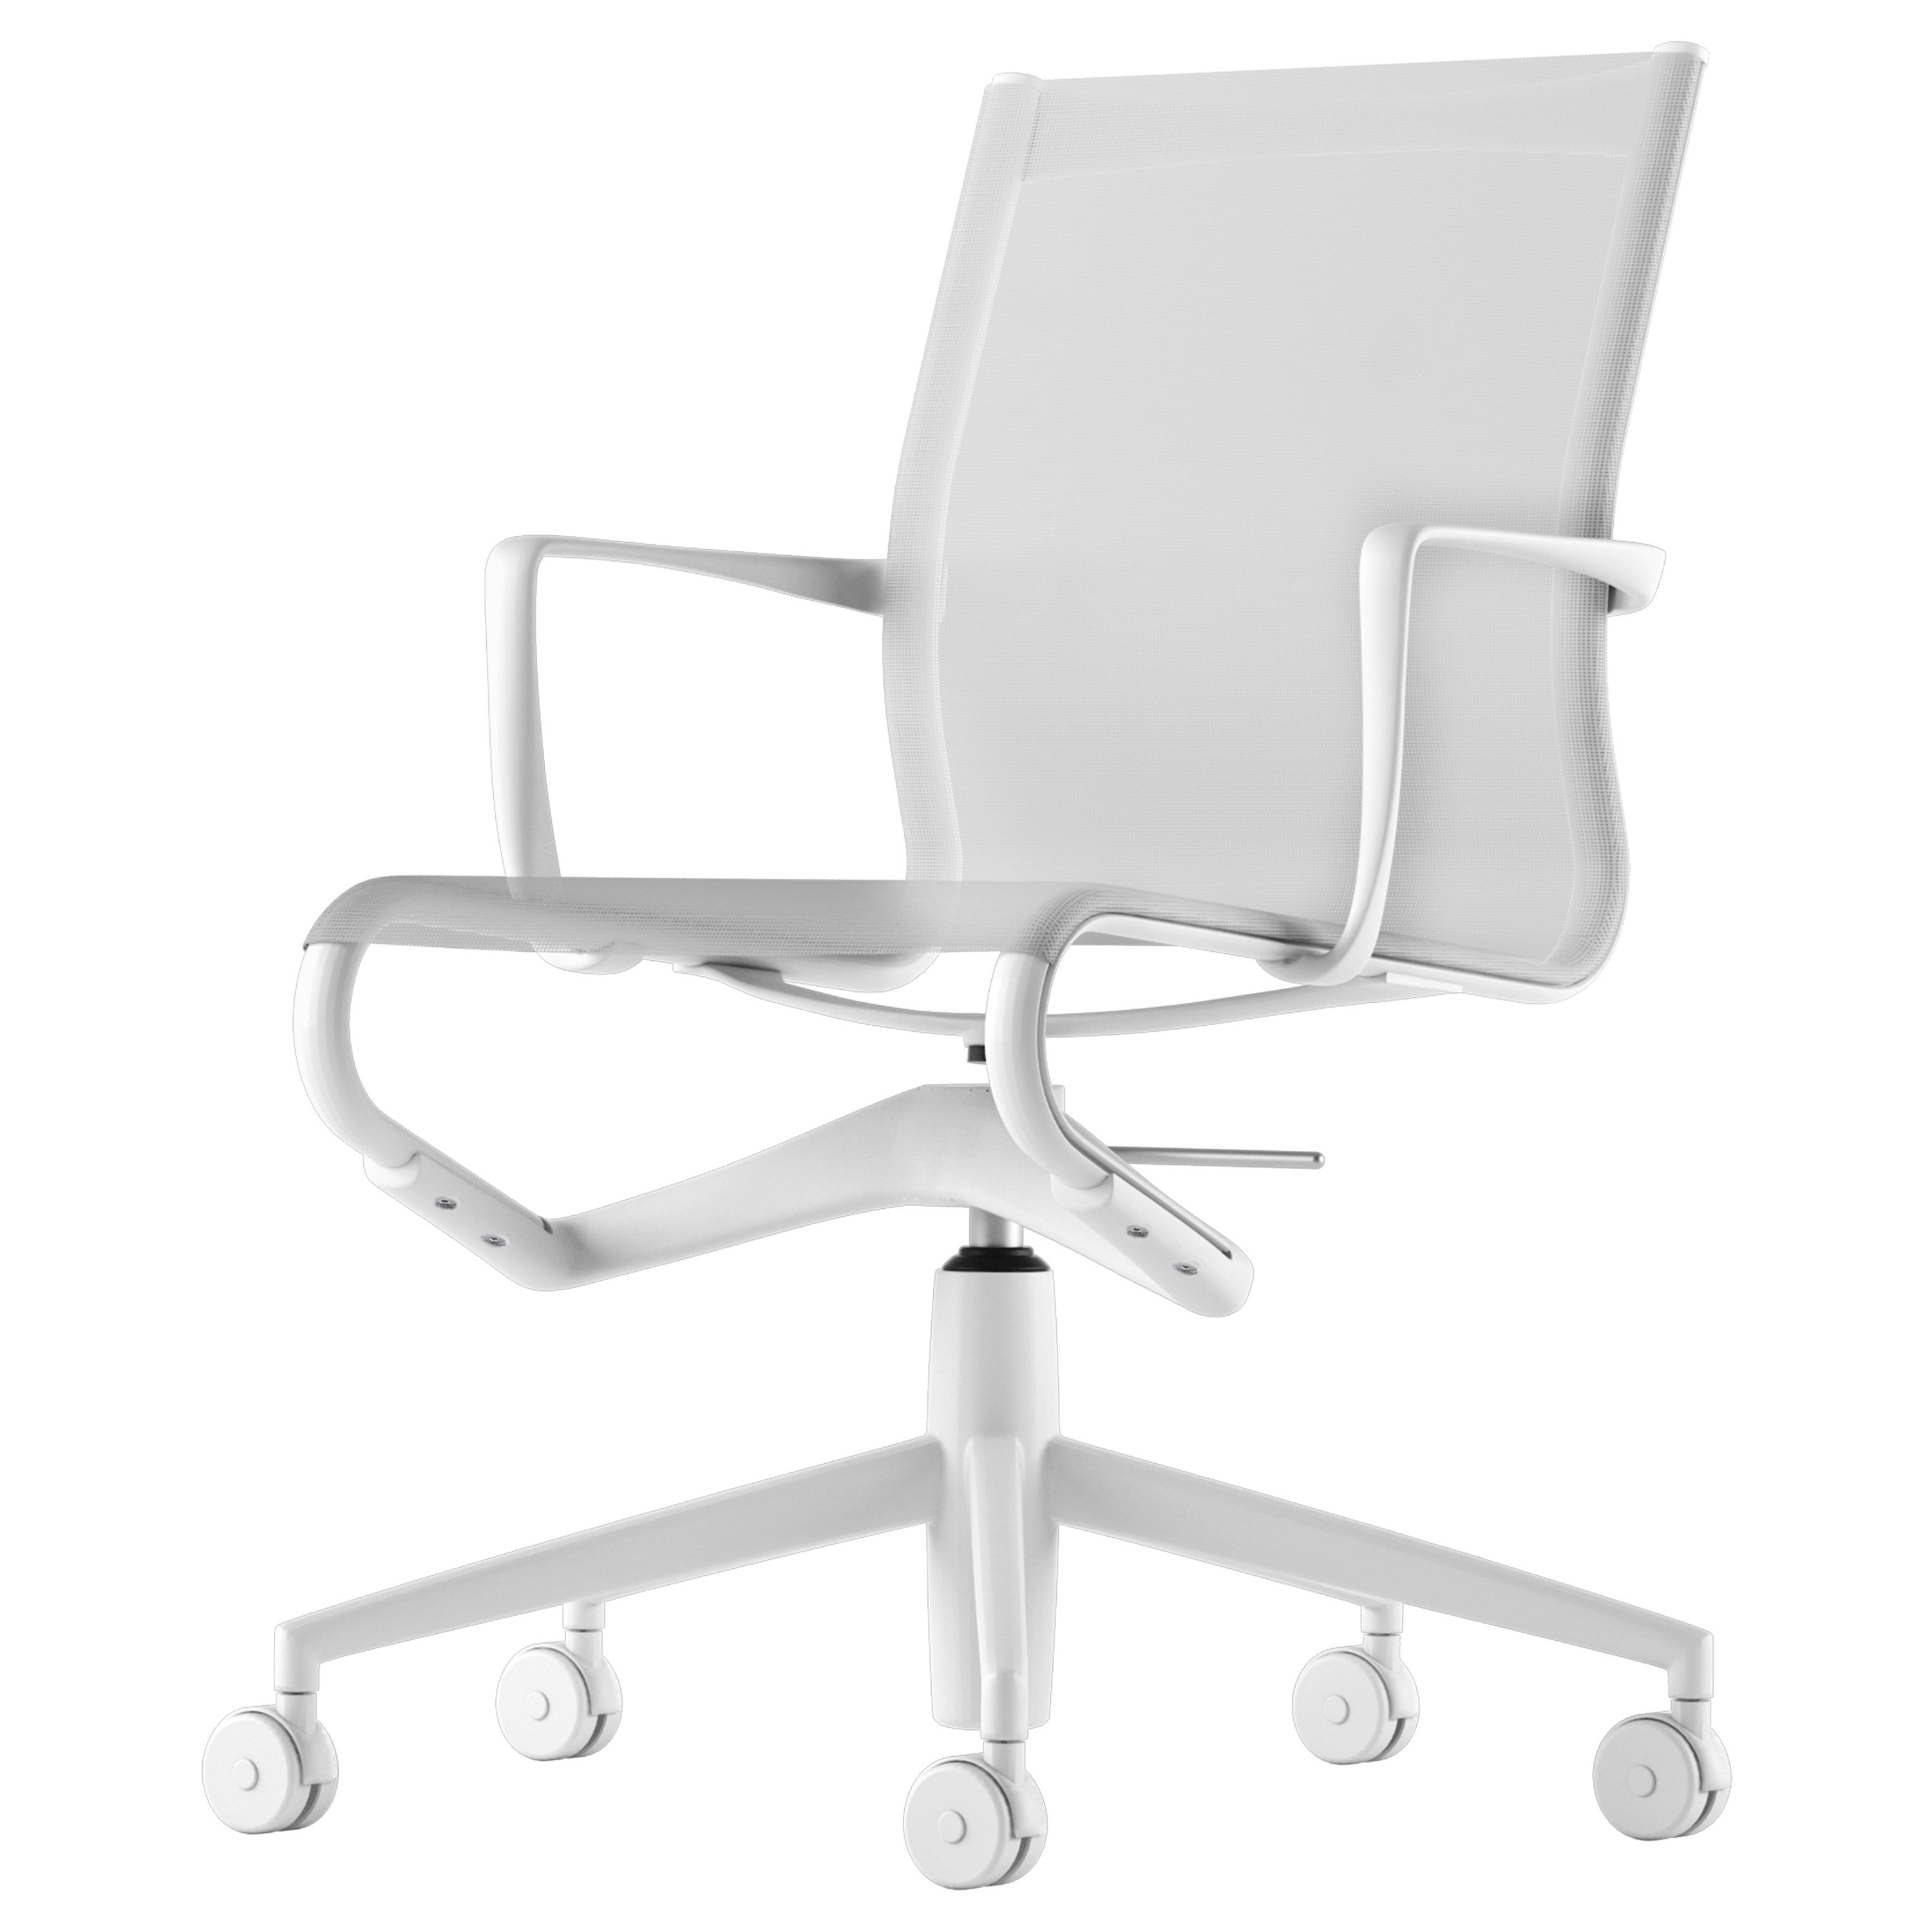 Alias 434 Rollingframe 44 Chair in White Mesh with Lacquered Aluminum Frame For Sale